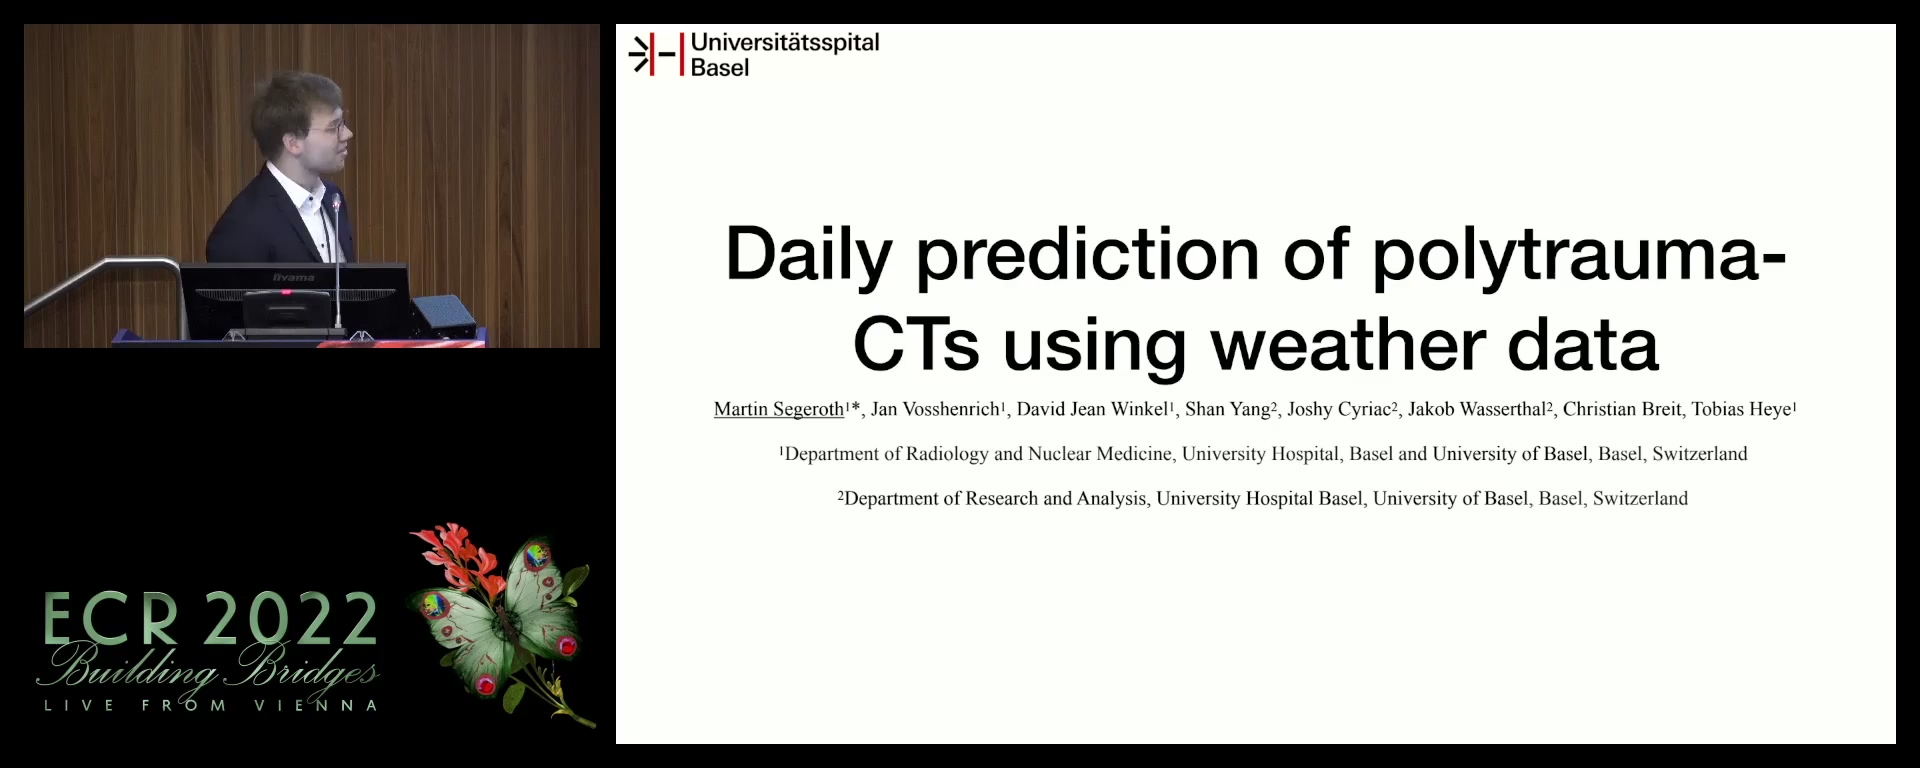 Daily prediction of polytrauma-CTs using weather data - Martin Segeroth, Basel / CH